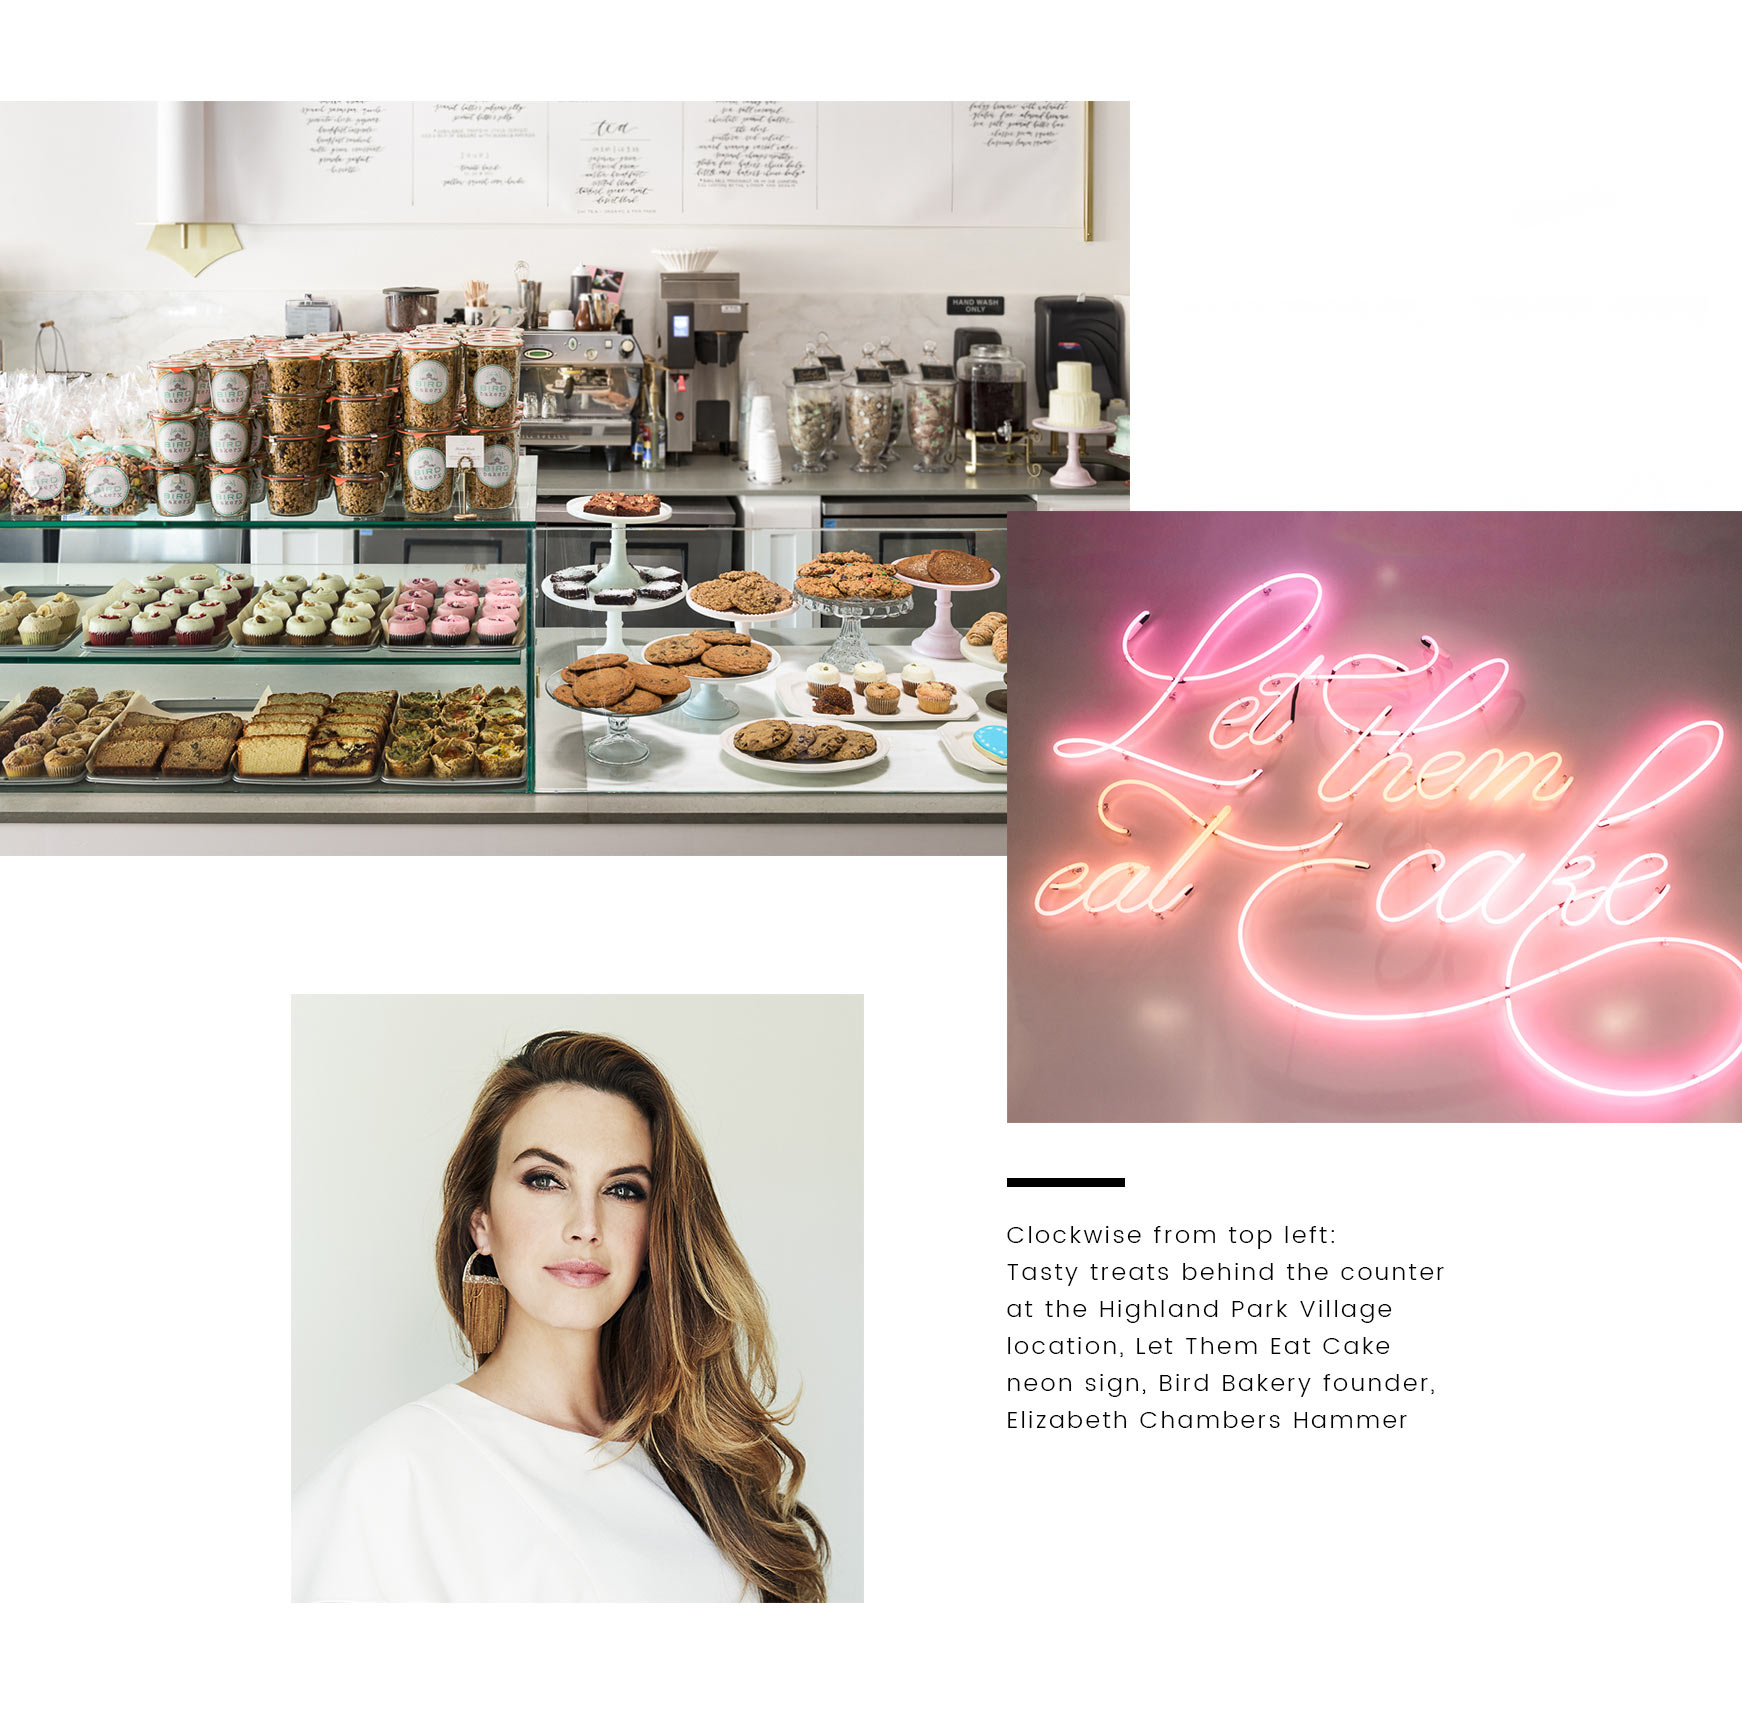 Clockwise from top left: Tasty treats behind the counter at the Highland Park Village location, Let them Eat Cake neon sign, Bird Bakery founder Elizabeth Chambers